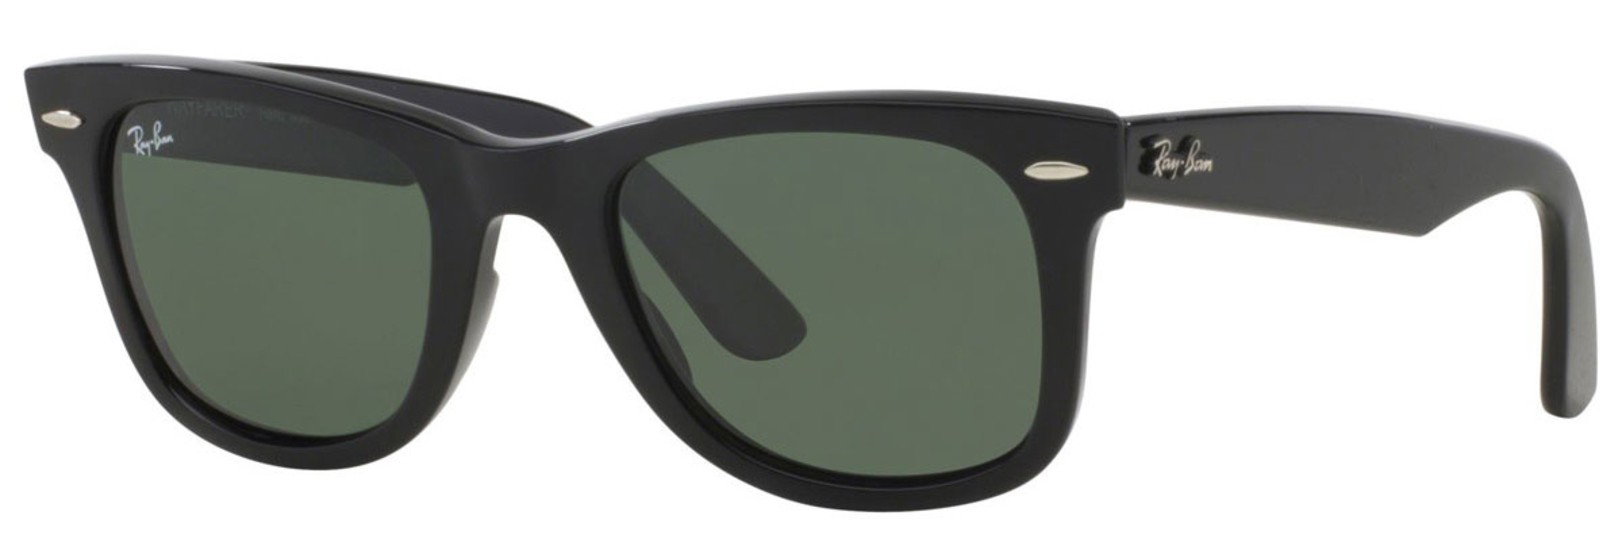 ray ban unisex rb2140